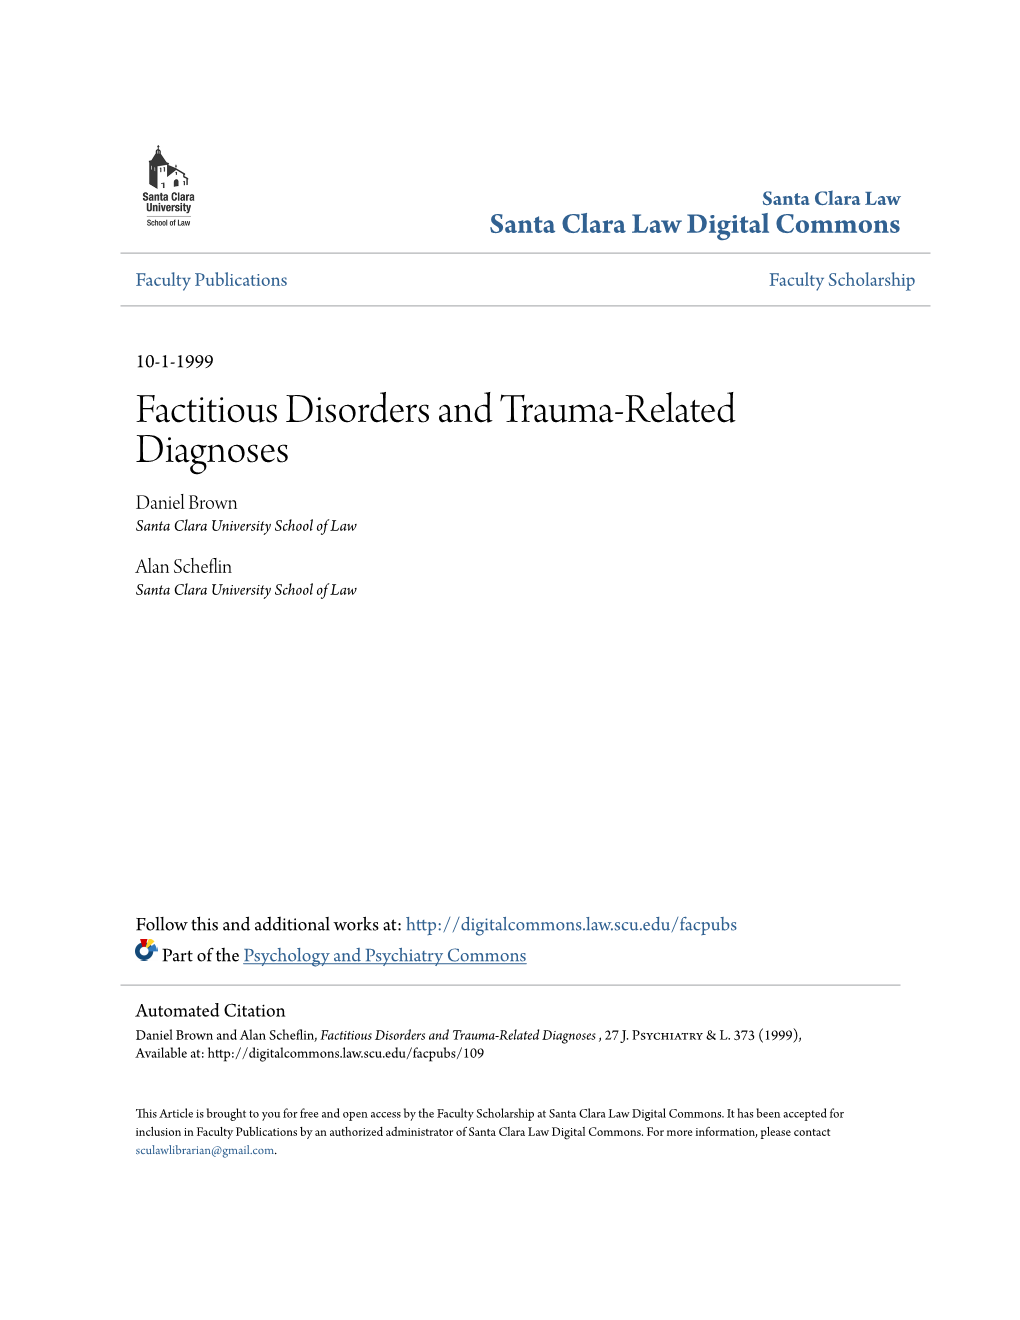 Factitious Disorders and Trauma-Related Diagnoses Daniel Brown Santa Clara University School of Law